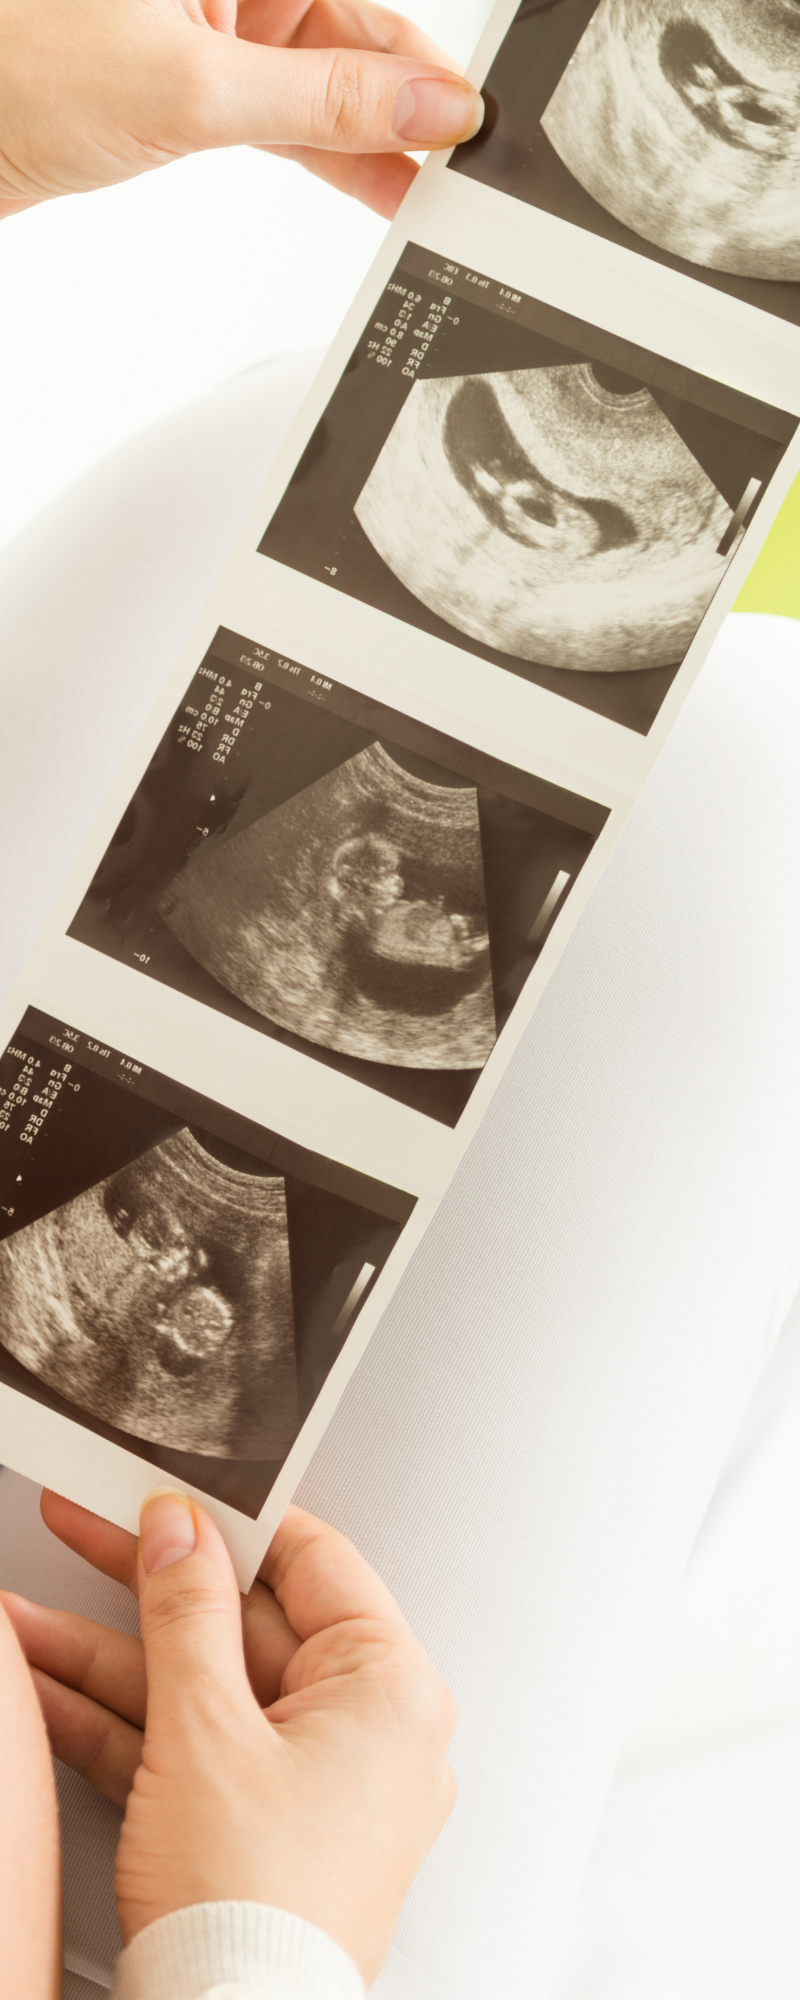 ultrasound images of a baby